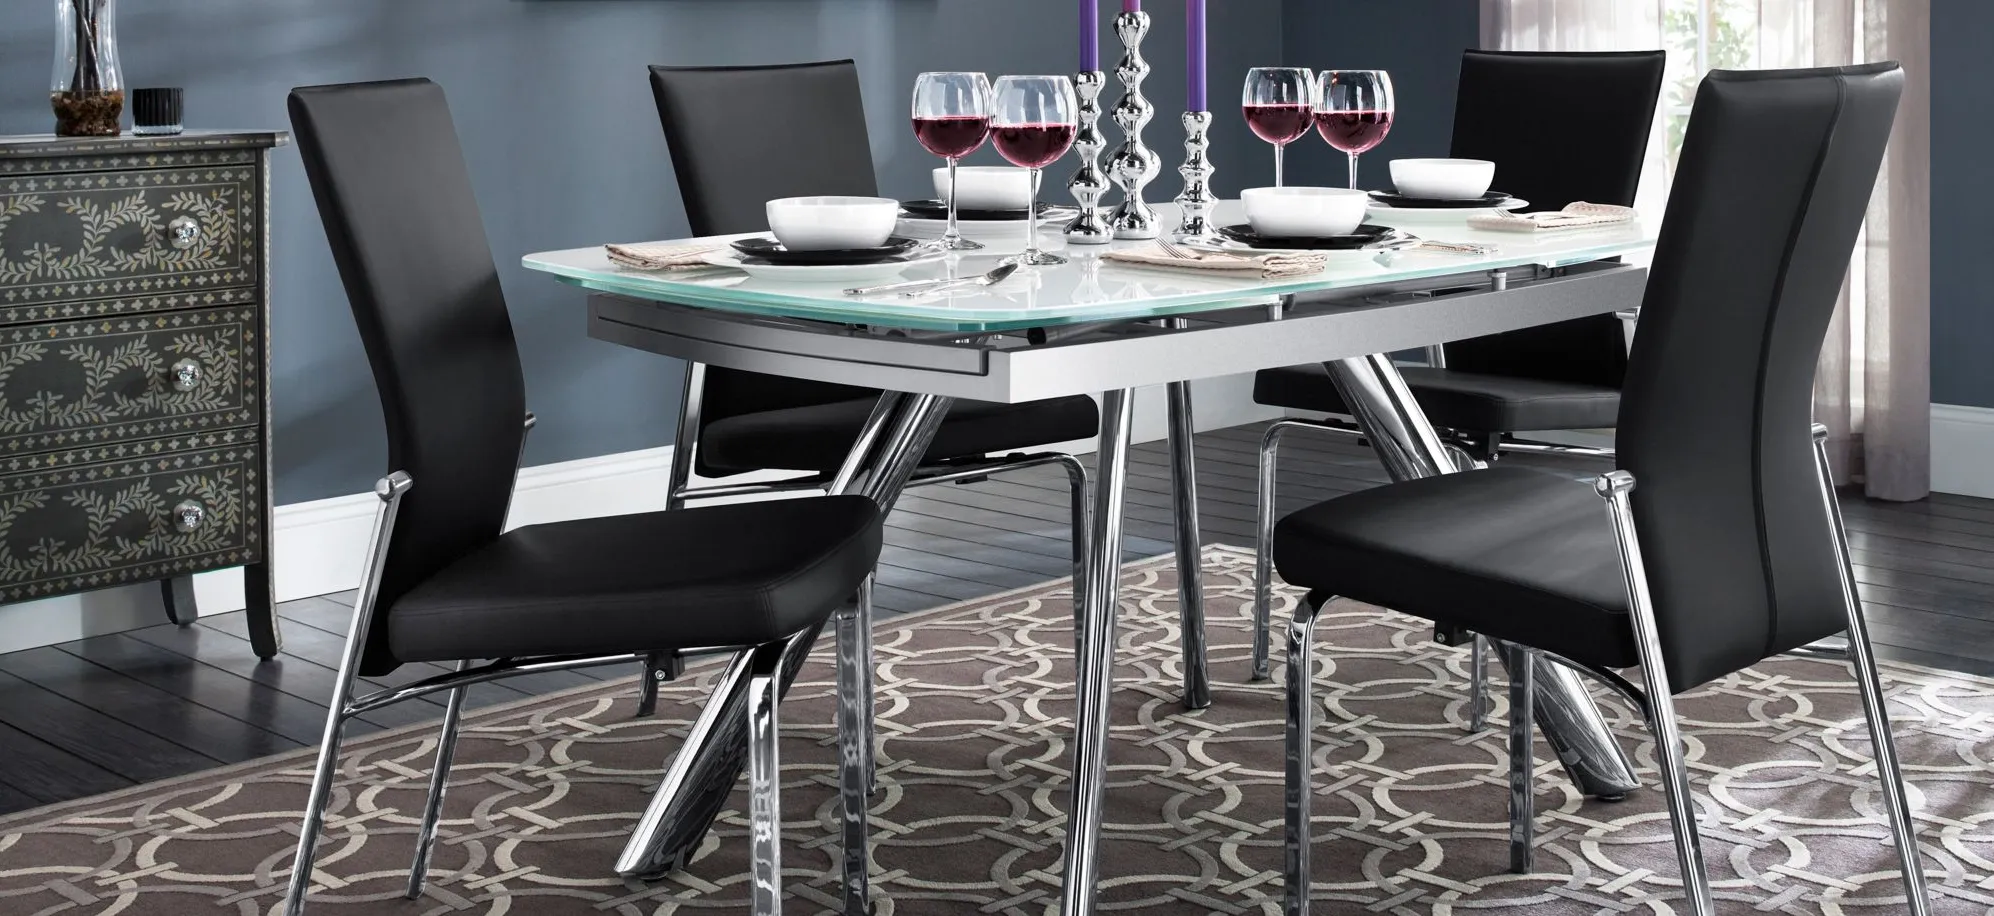 Paloma 5-pc. Glass Dining Set in Chrome / Glass / Black by Chintaly Imports